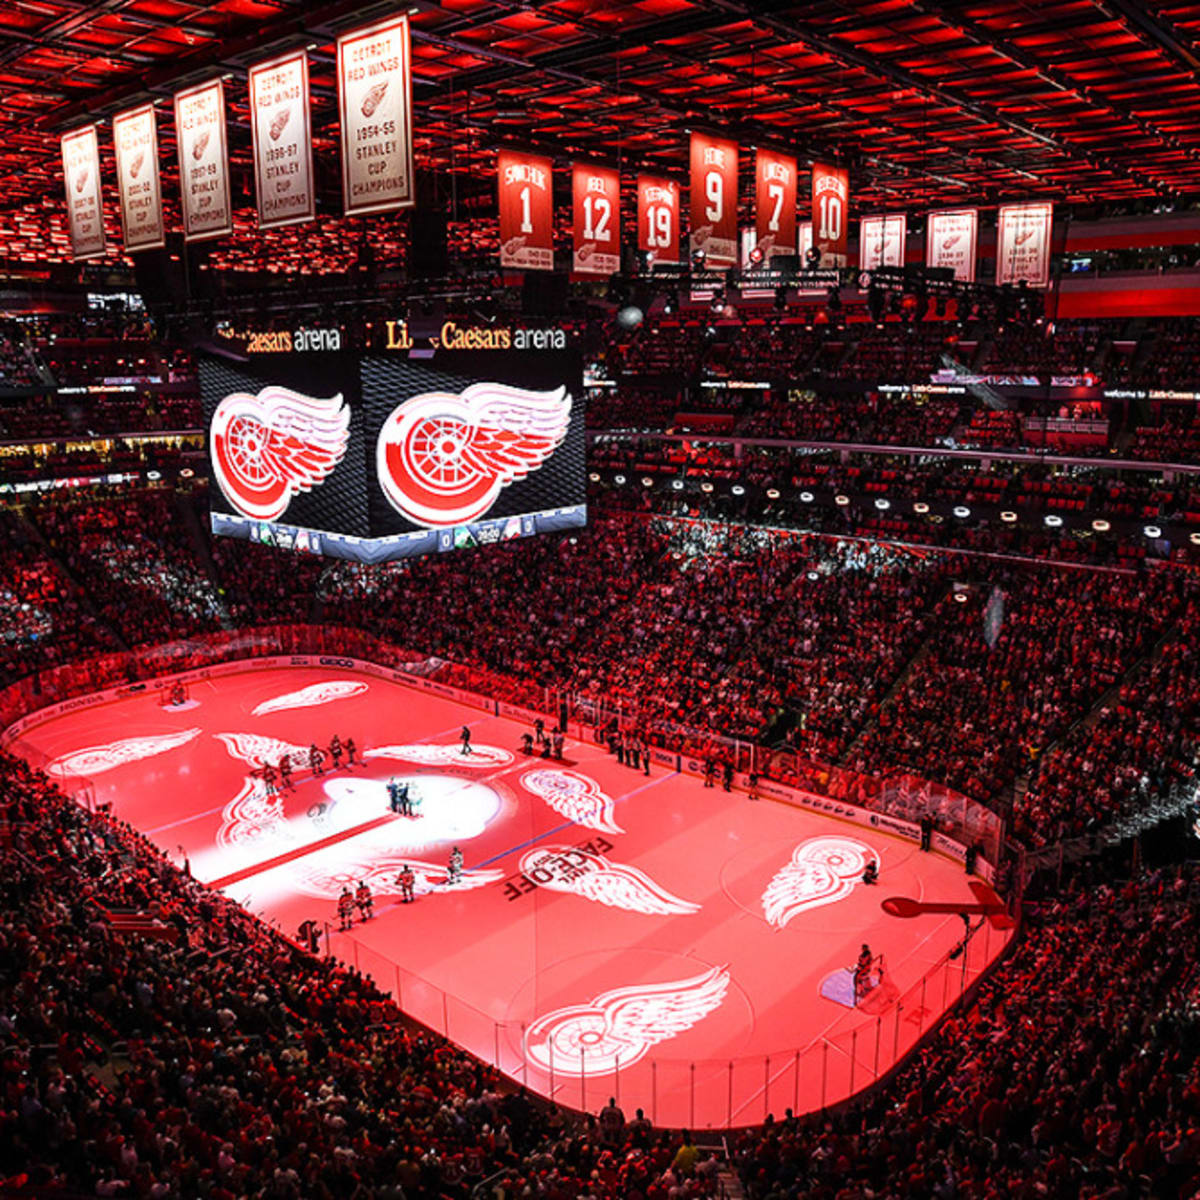 New arena for Red Wings in downtown Detroit in the works